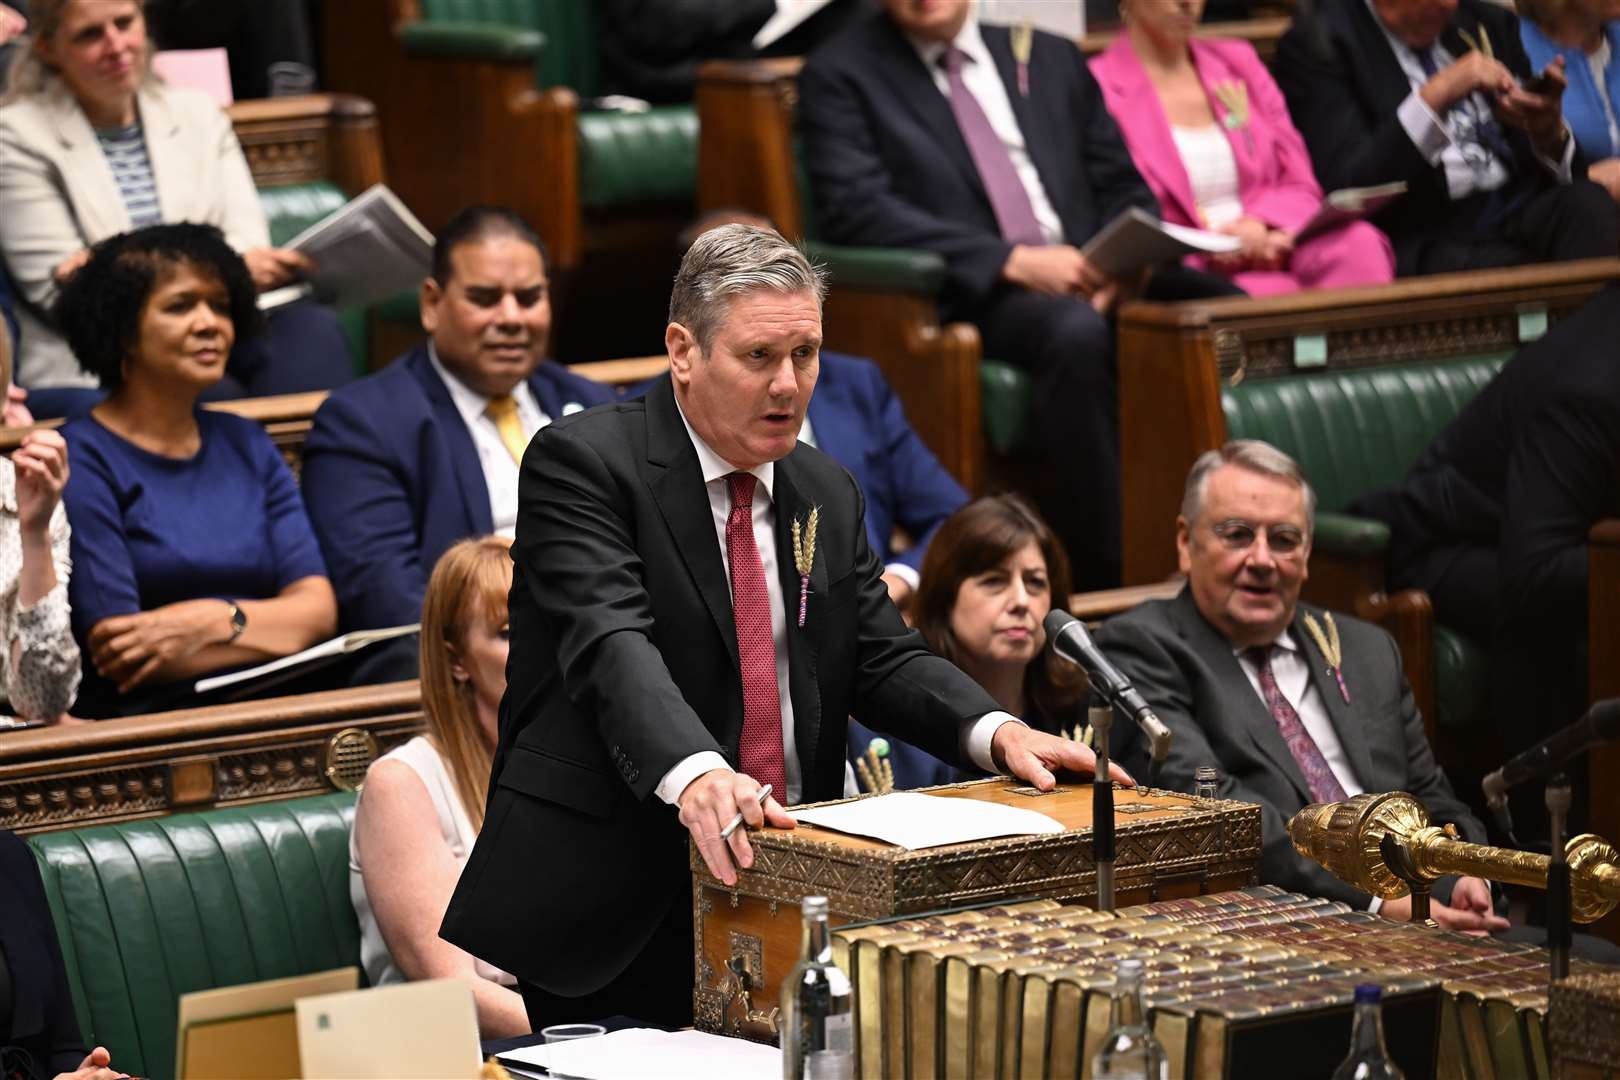 Sir Keir speaking during Prime Minister’s Questions in the House of Commons (Jessica Taylor/PA)